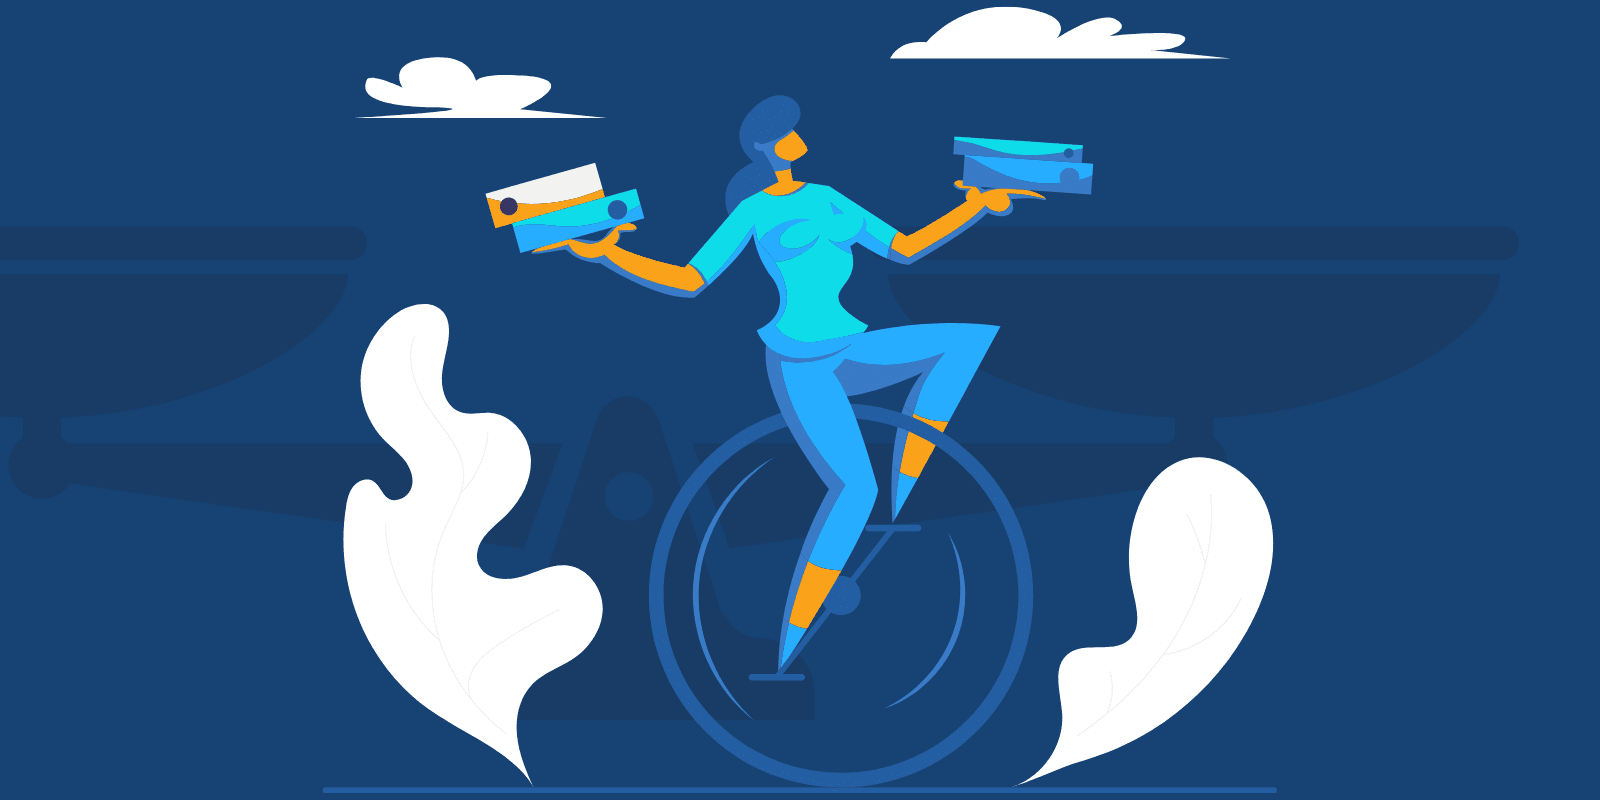 An illustration of a woman riding a unicycle balancing things on her hand